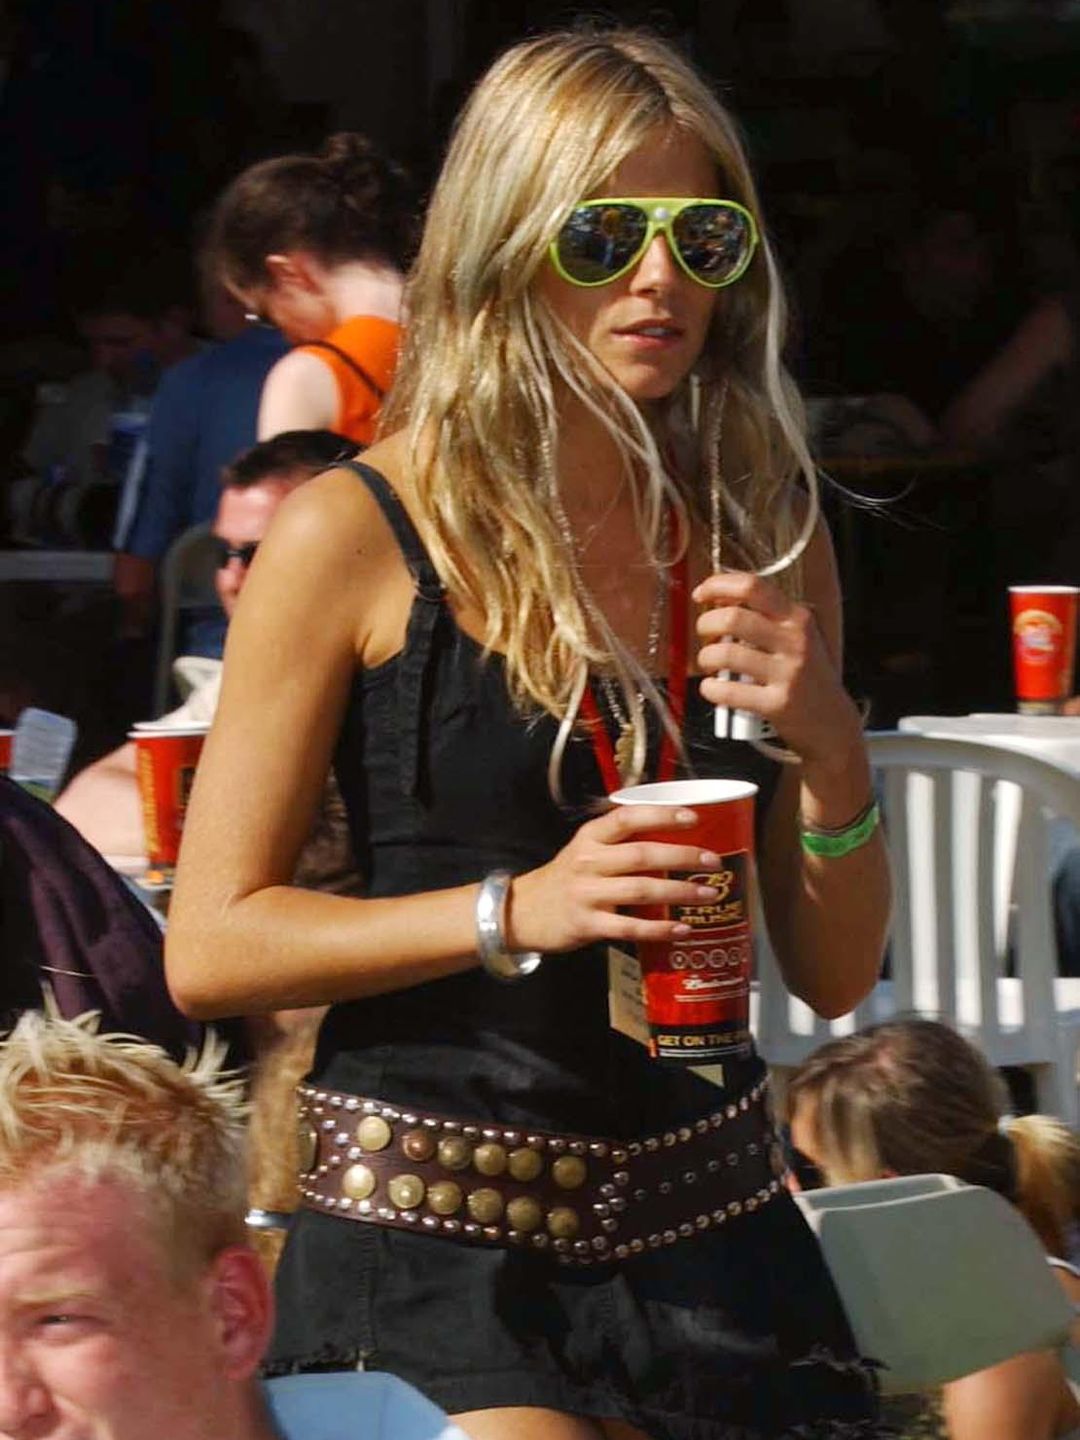 Actress Sienna Miller during the Glastonbury Festival, held at Worthy Farm in Pilton, Somerset.   (Photo by Andy Butterton - PA Images/PA Images via Getty Images)